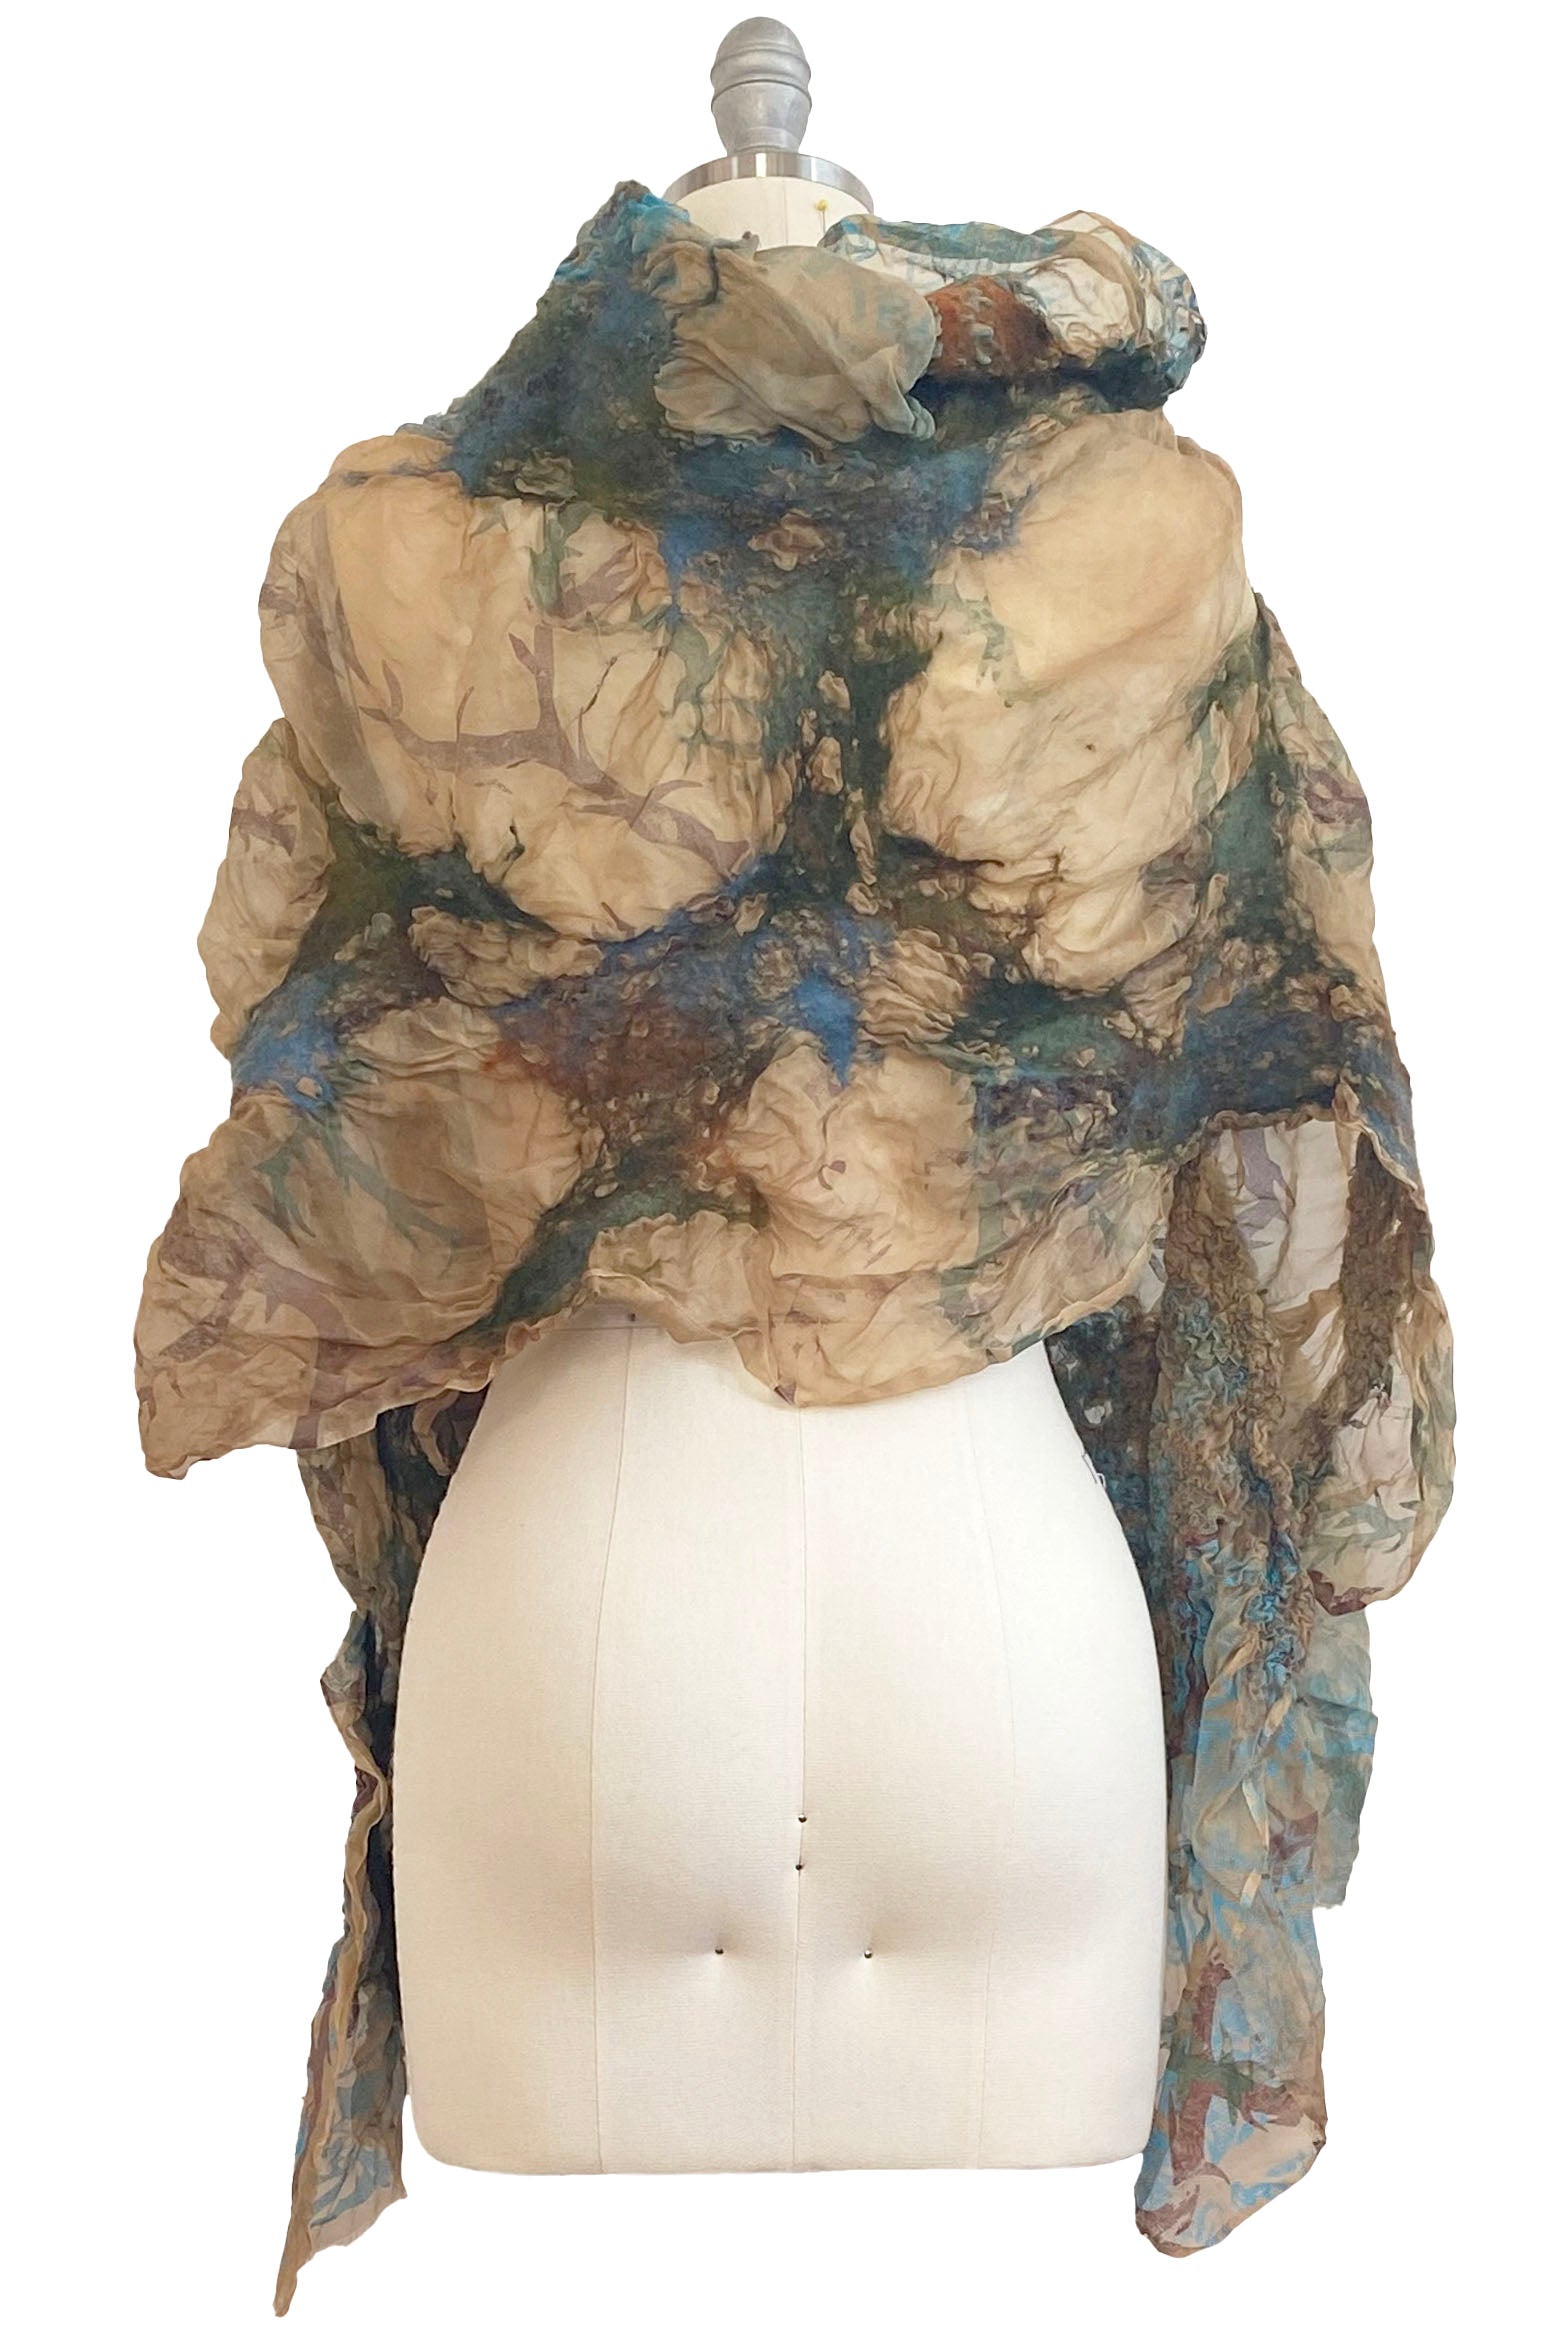 Felted Shawl - Silk Organza - Tea Stained & Blue w/ Tile Print